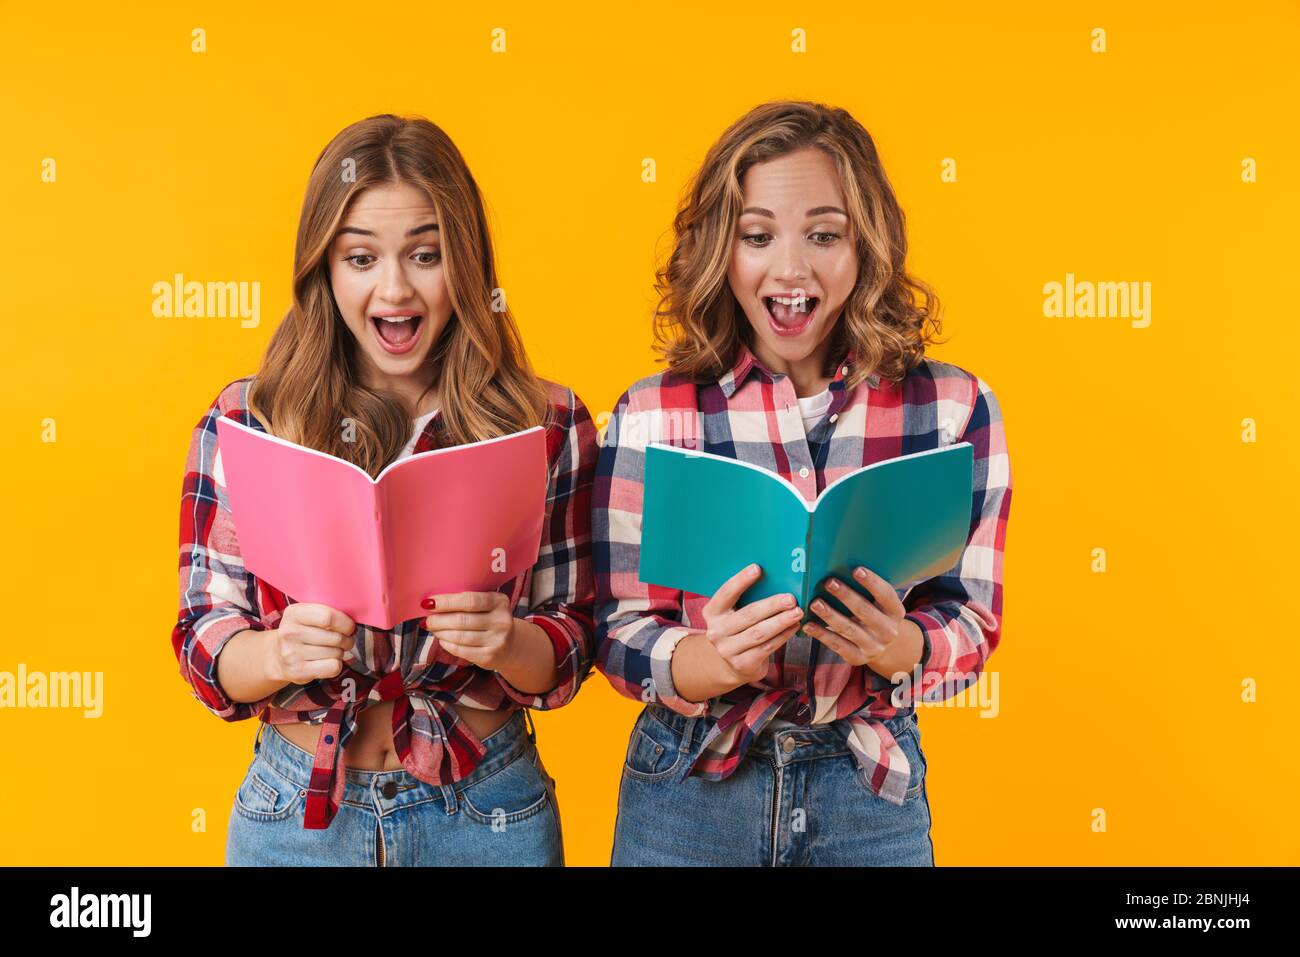 Image of two young beautiful girls wearing plaid shirts smiling and holding diary books isolated over yellow background Stock Photo